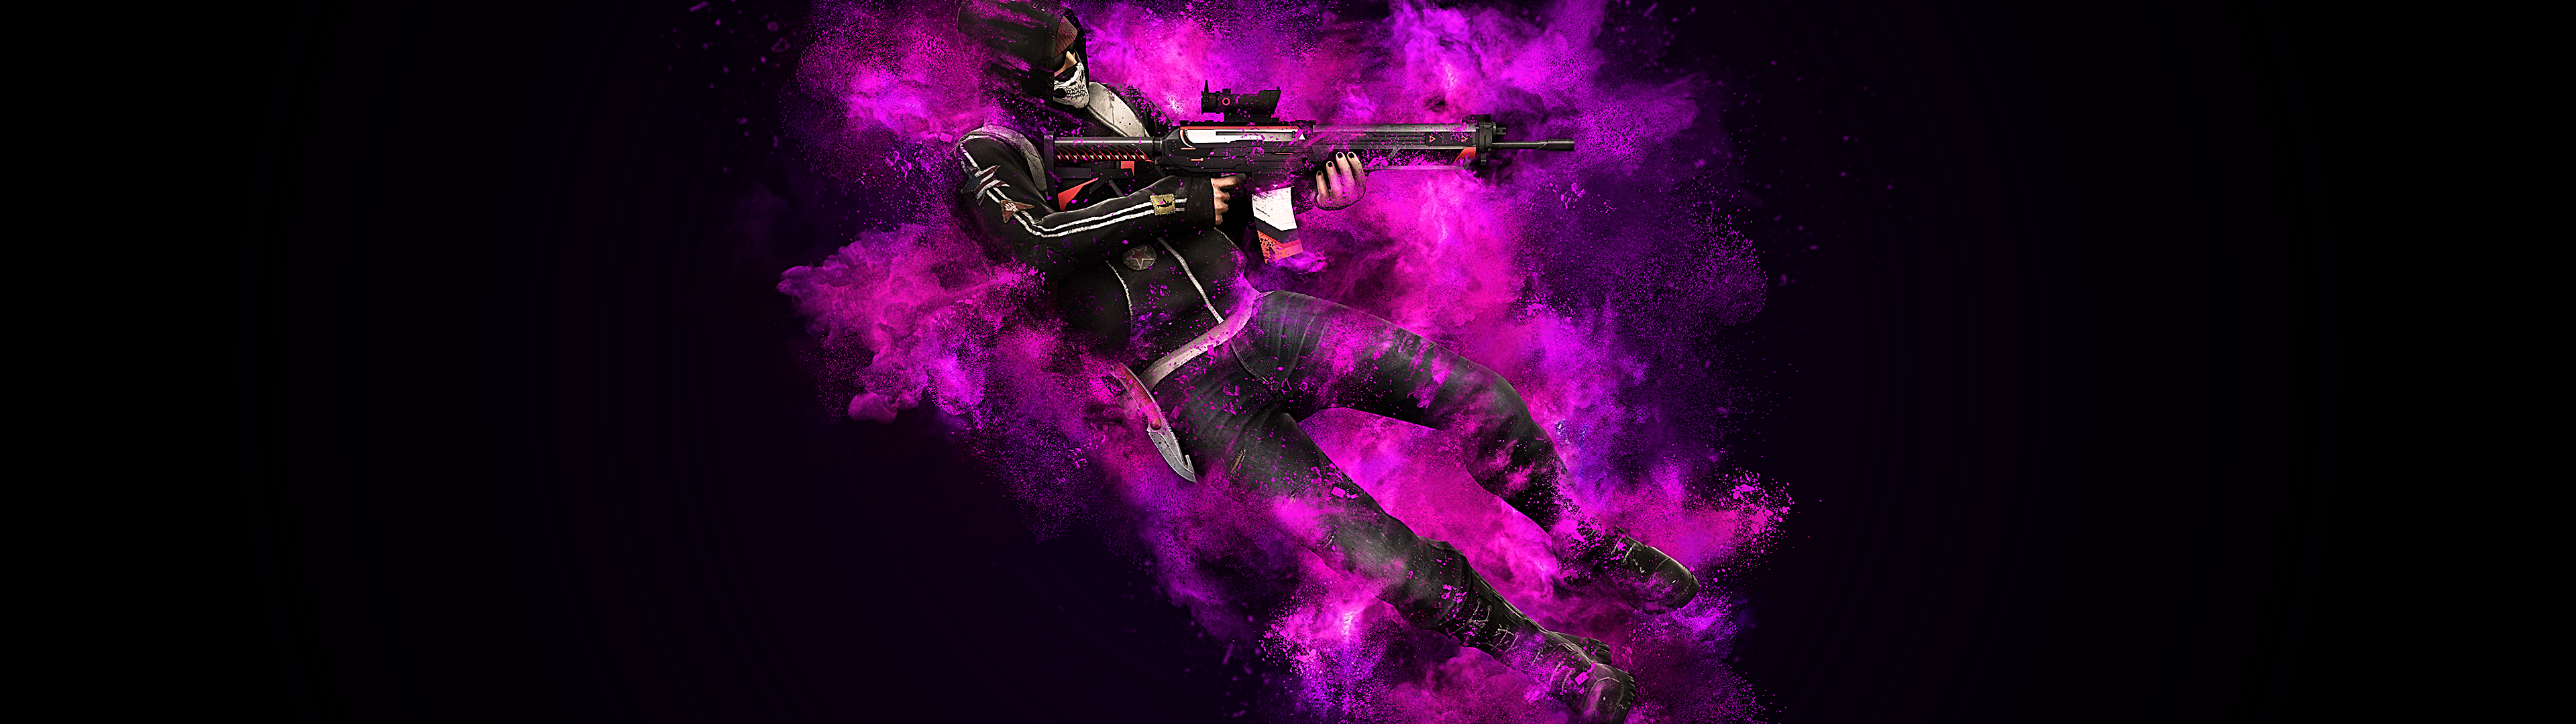 Wallpaper Counter Strike Soldiers cs go Games 1366x768